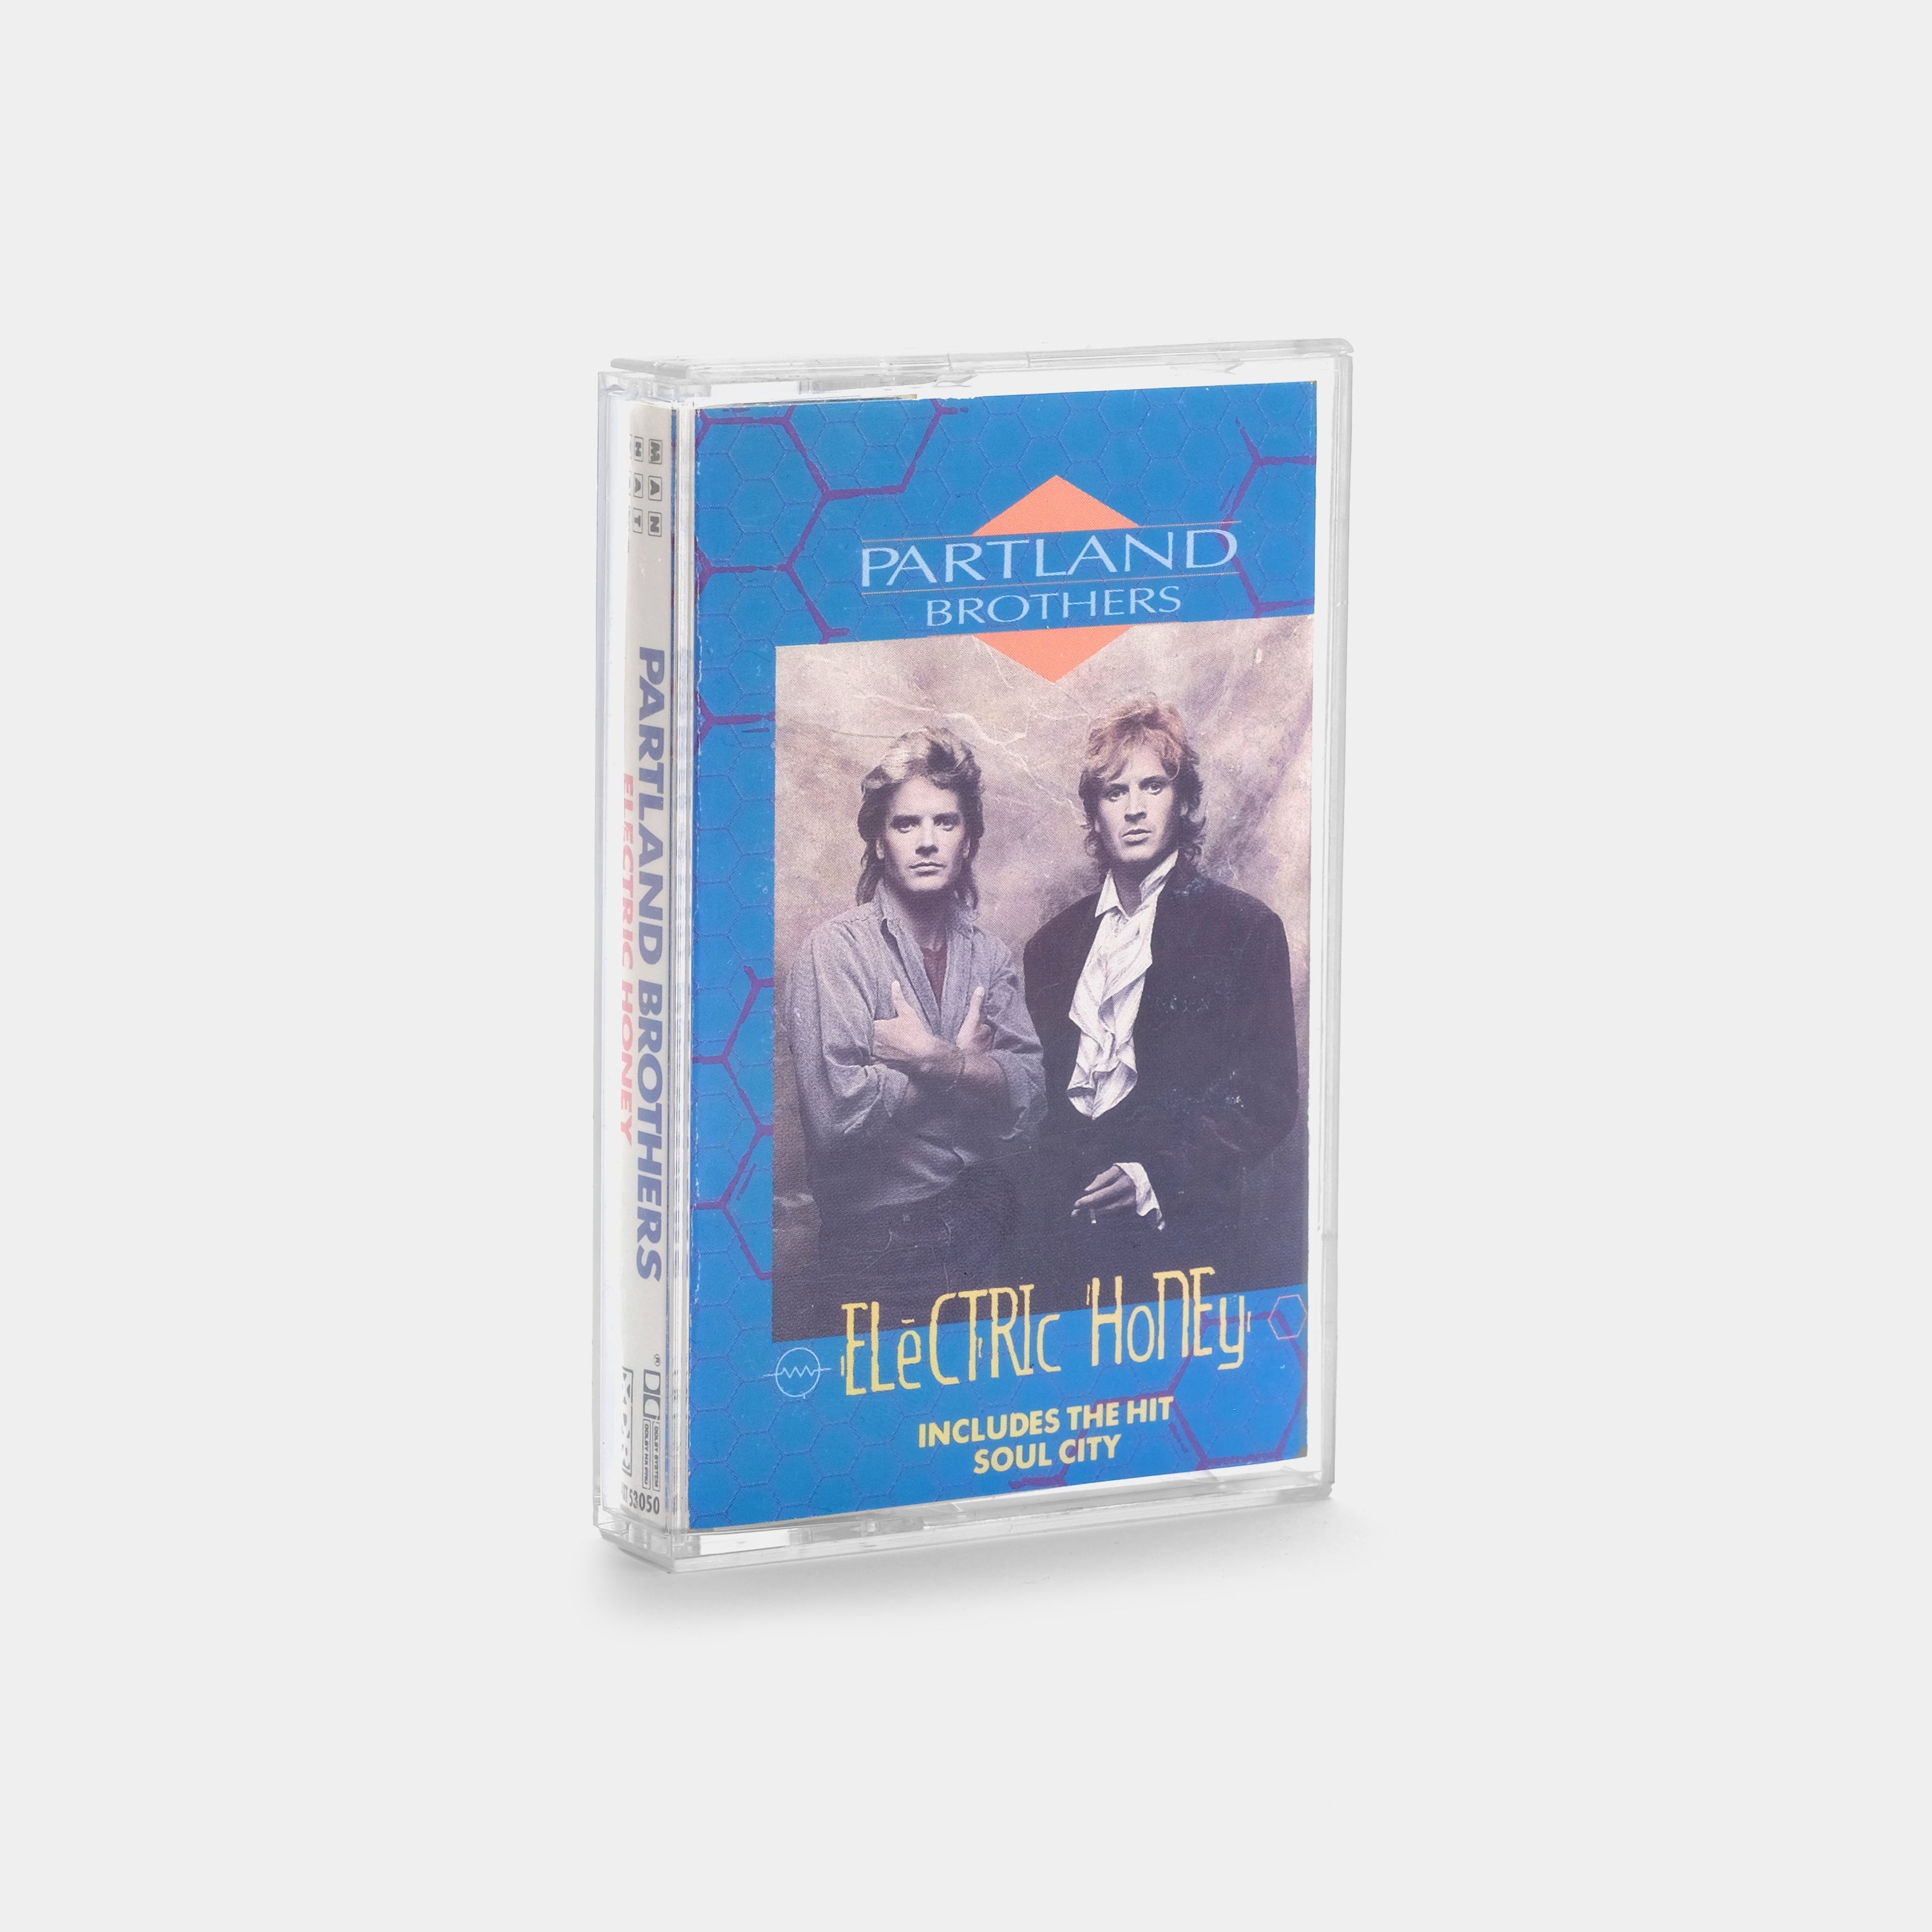 Partland Brothers - Electric Honey Cassette Tape